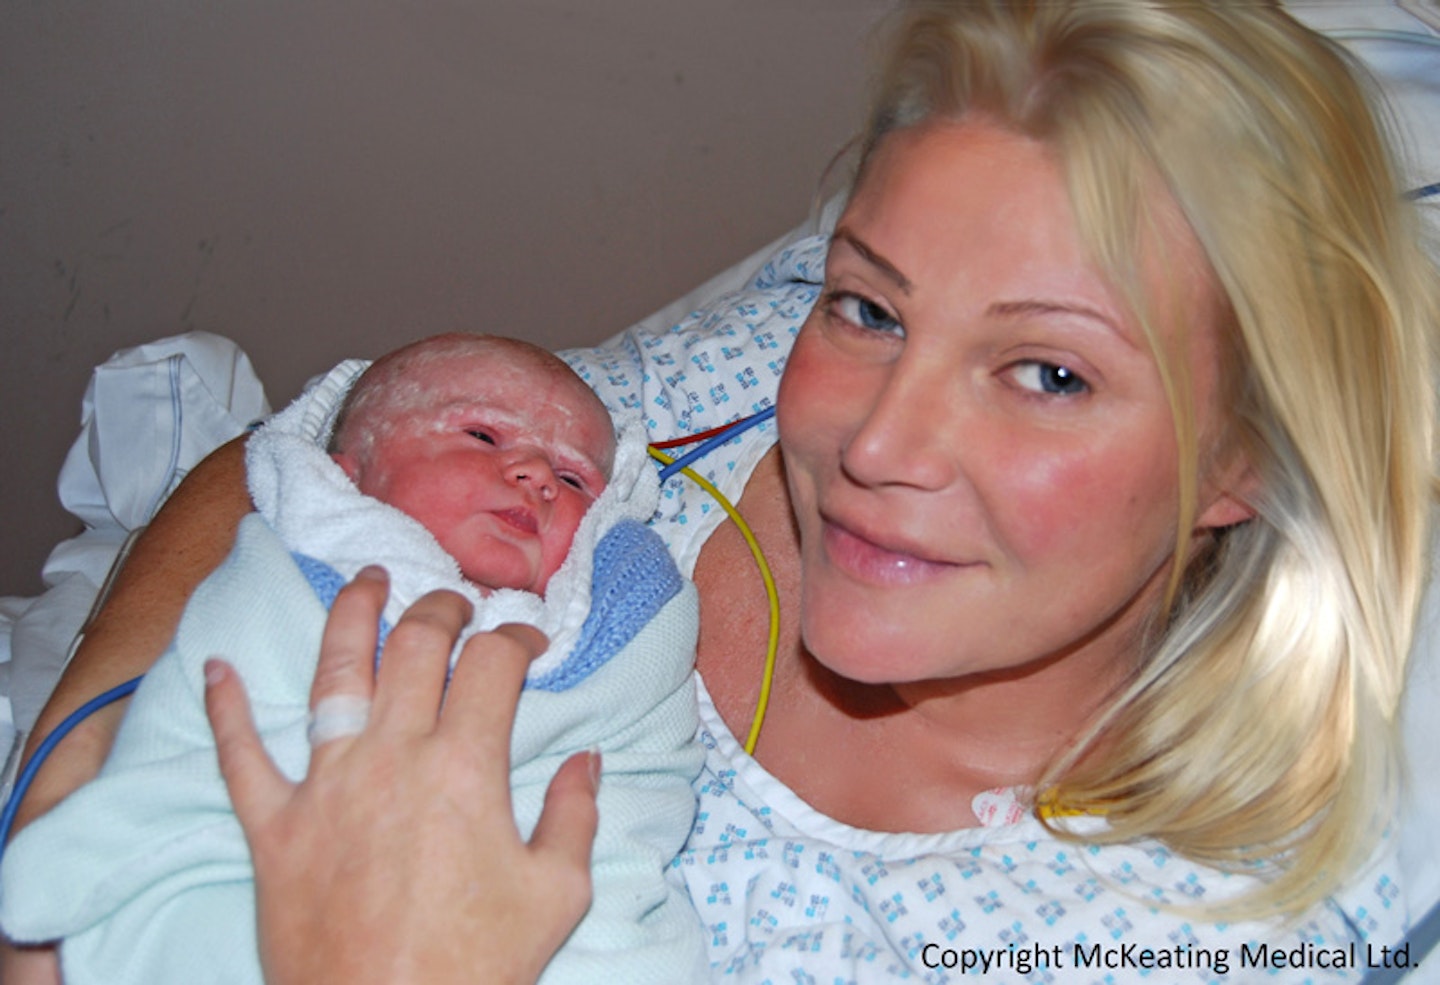 ‘I had a natural c-section’